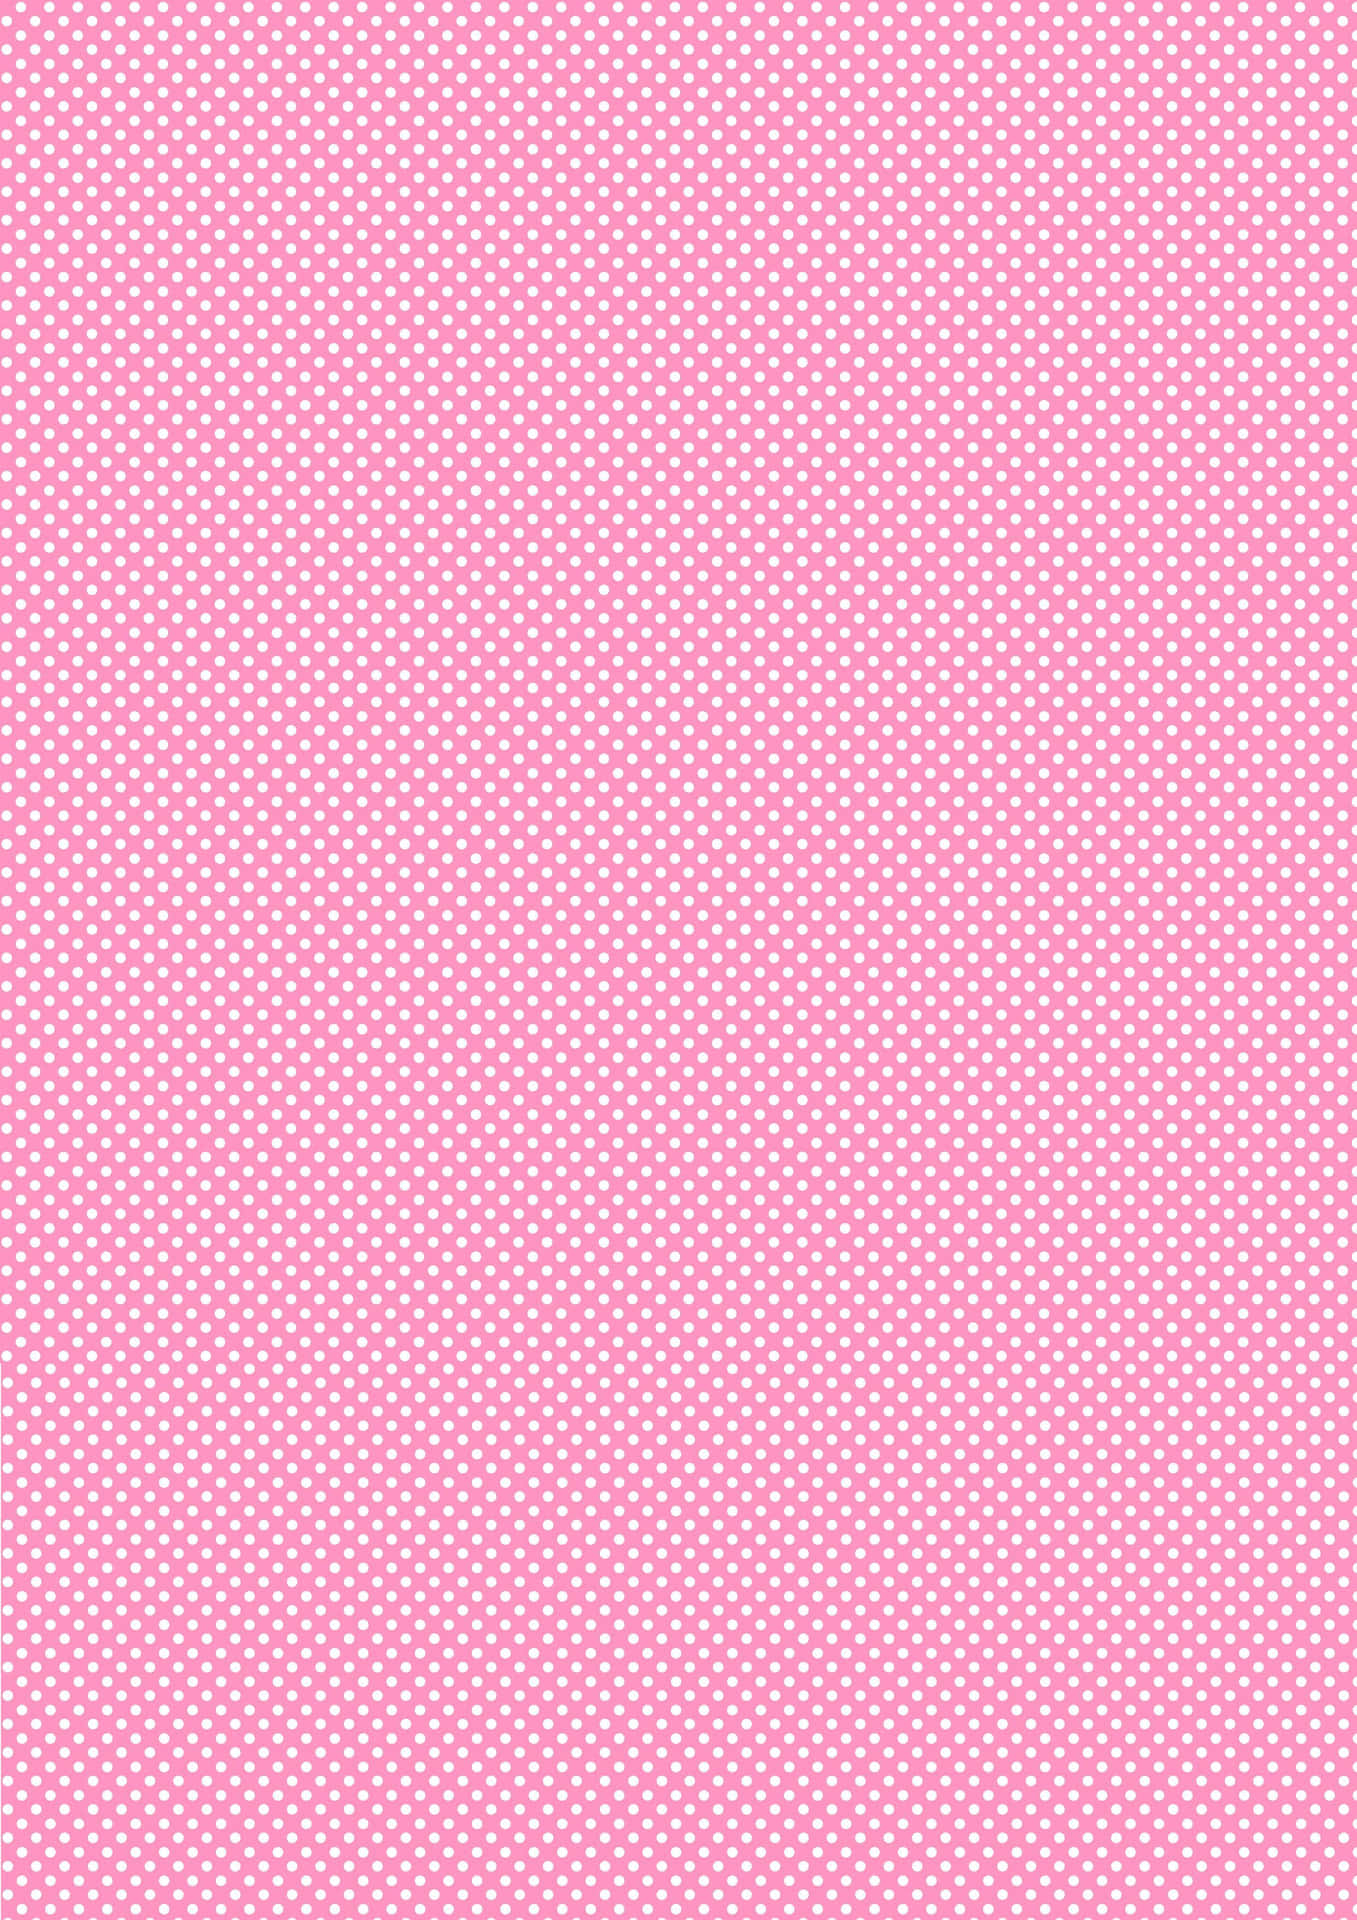 Delicate Pink Polka Dot Pattern Perfect for Wallpaper